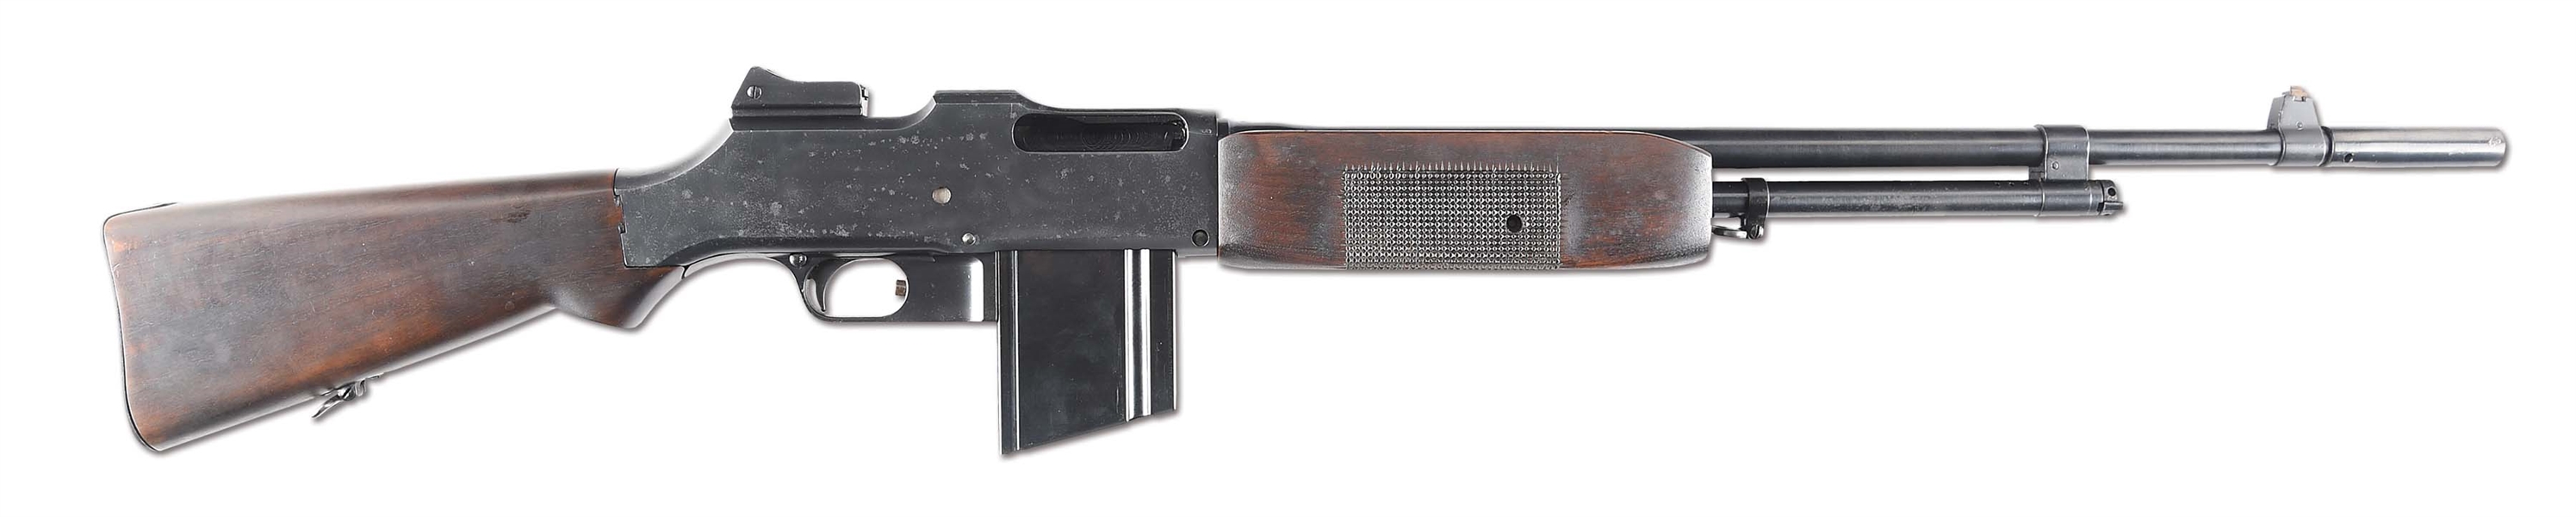 (N) EXCEPTIONAL MILITARY PROOFED COLT MODEL 1918 BROWNING AUTOMATIC RIFLE (B.A.R.) MACHINE GUN (CURIO AND RELIC).